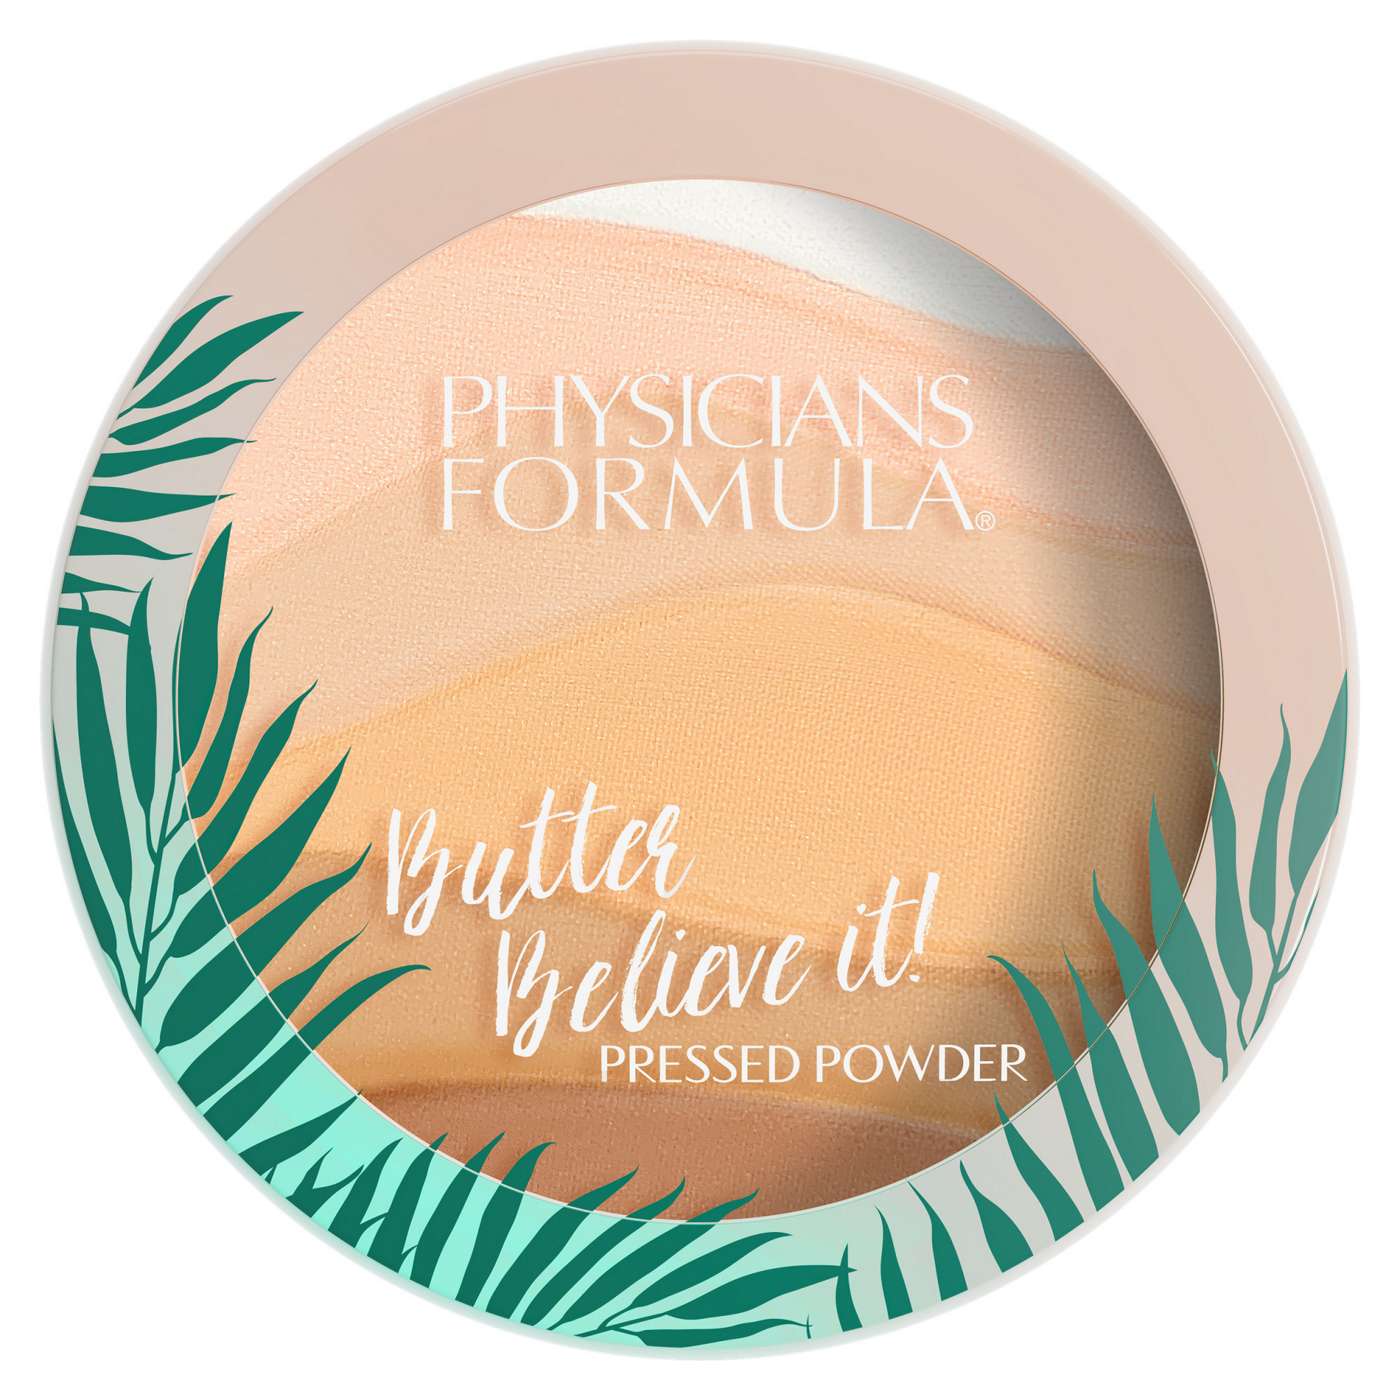 Physicians Formula Butter Believe It! Pressed Powder Translucent; image 2 of 5